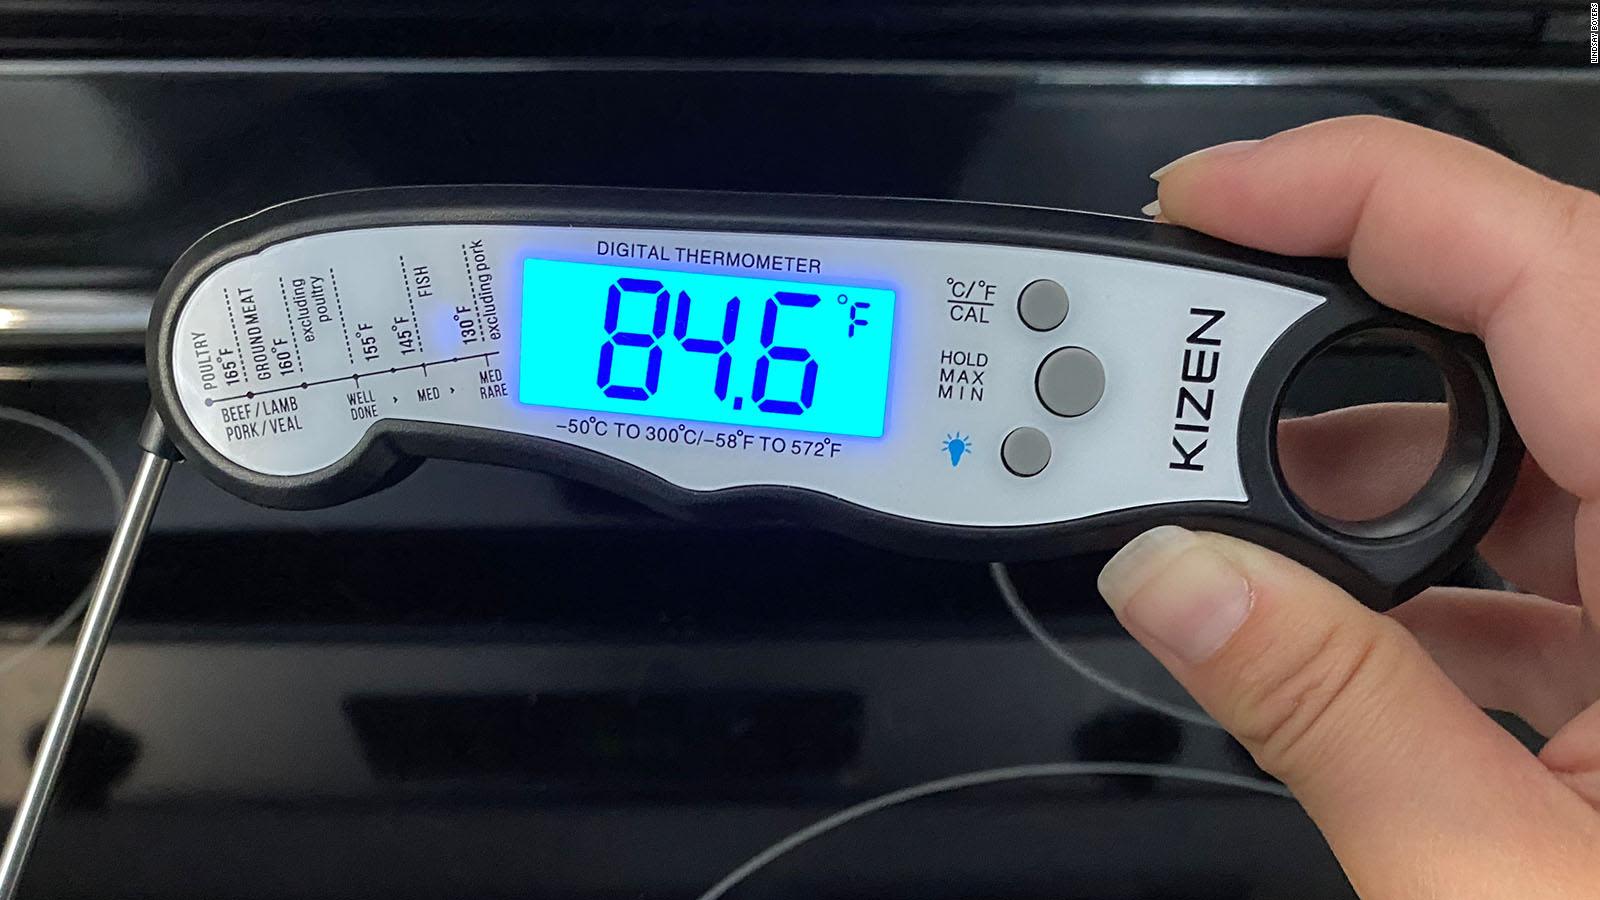 https://media.cnn.com/api/v1/images/stellar/prod/underscored-best-tested-products-meat-thermometer-kizen-digital-meat-thermometer-lifestyle-shot.jpeg?q=h_900,w_1600,x_0,y_0